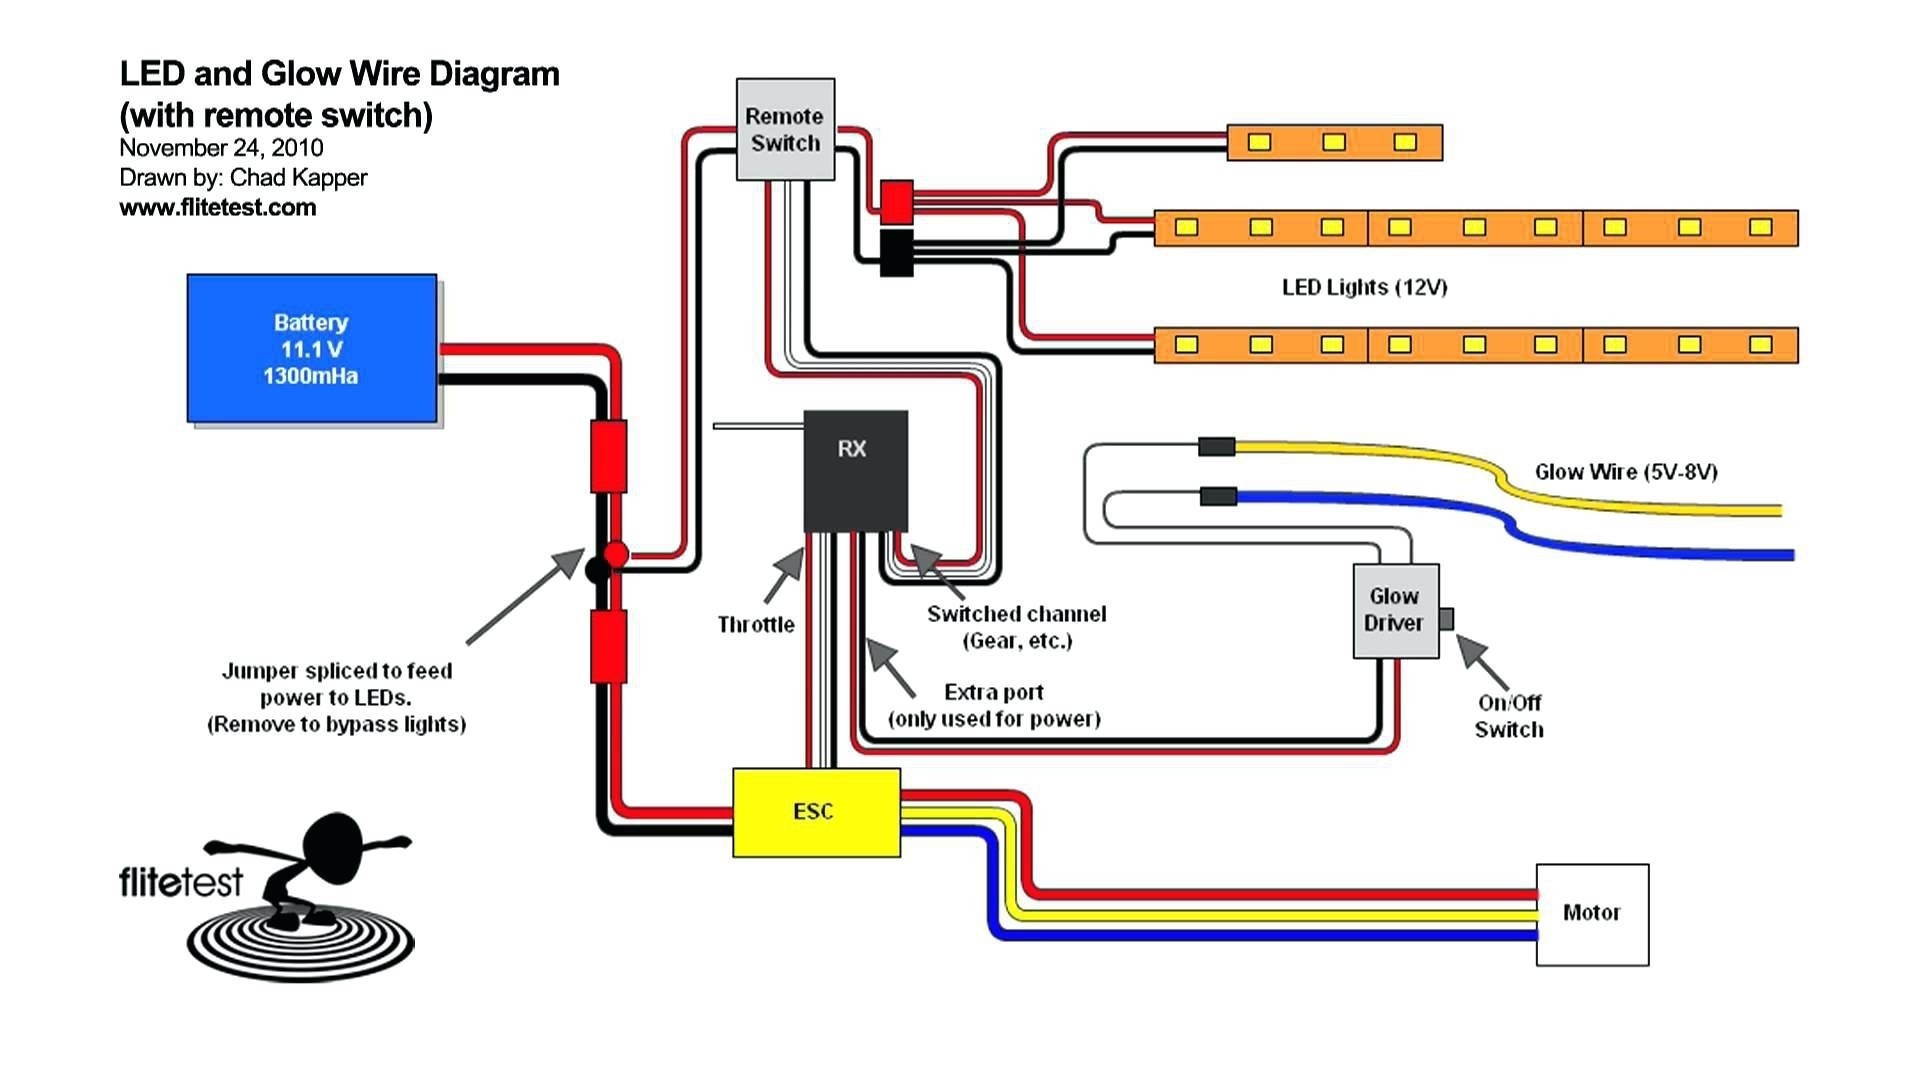 Wiring Diagram Switch to Two Lights New Peerless Light Switch Wiring Diagram Multiple Lights Image 0d